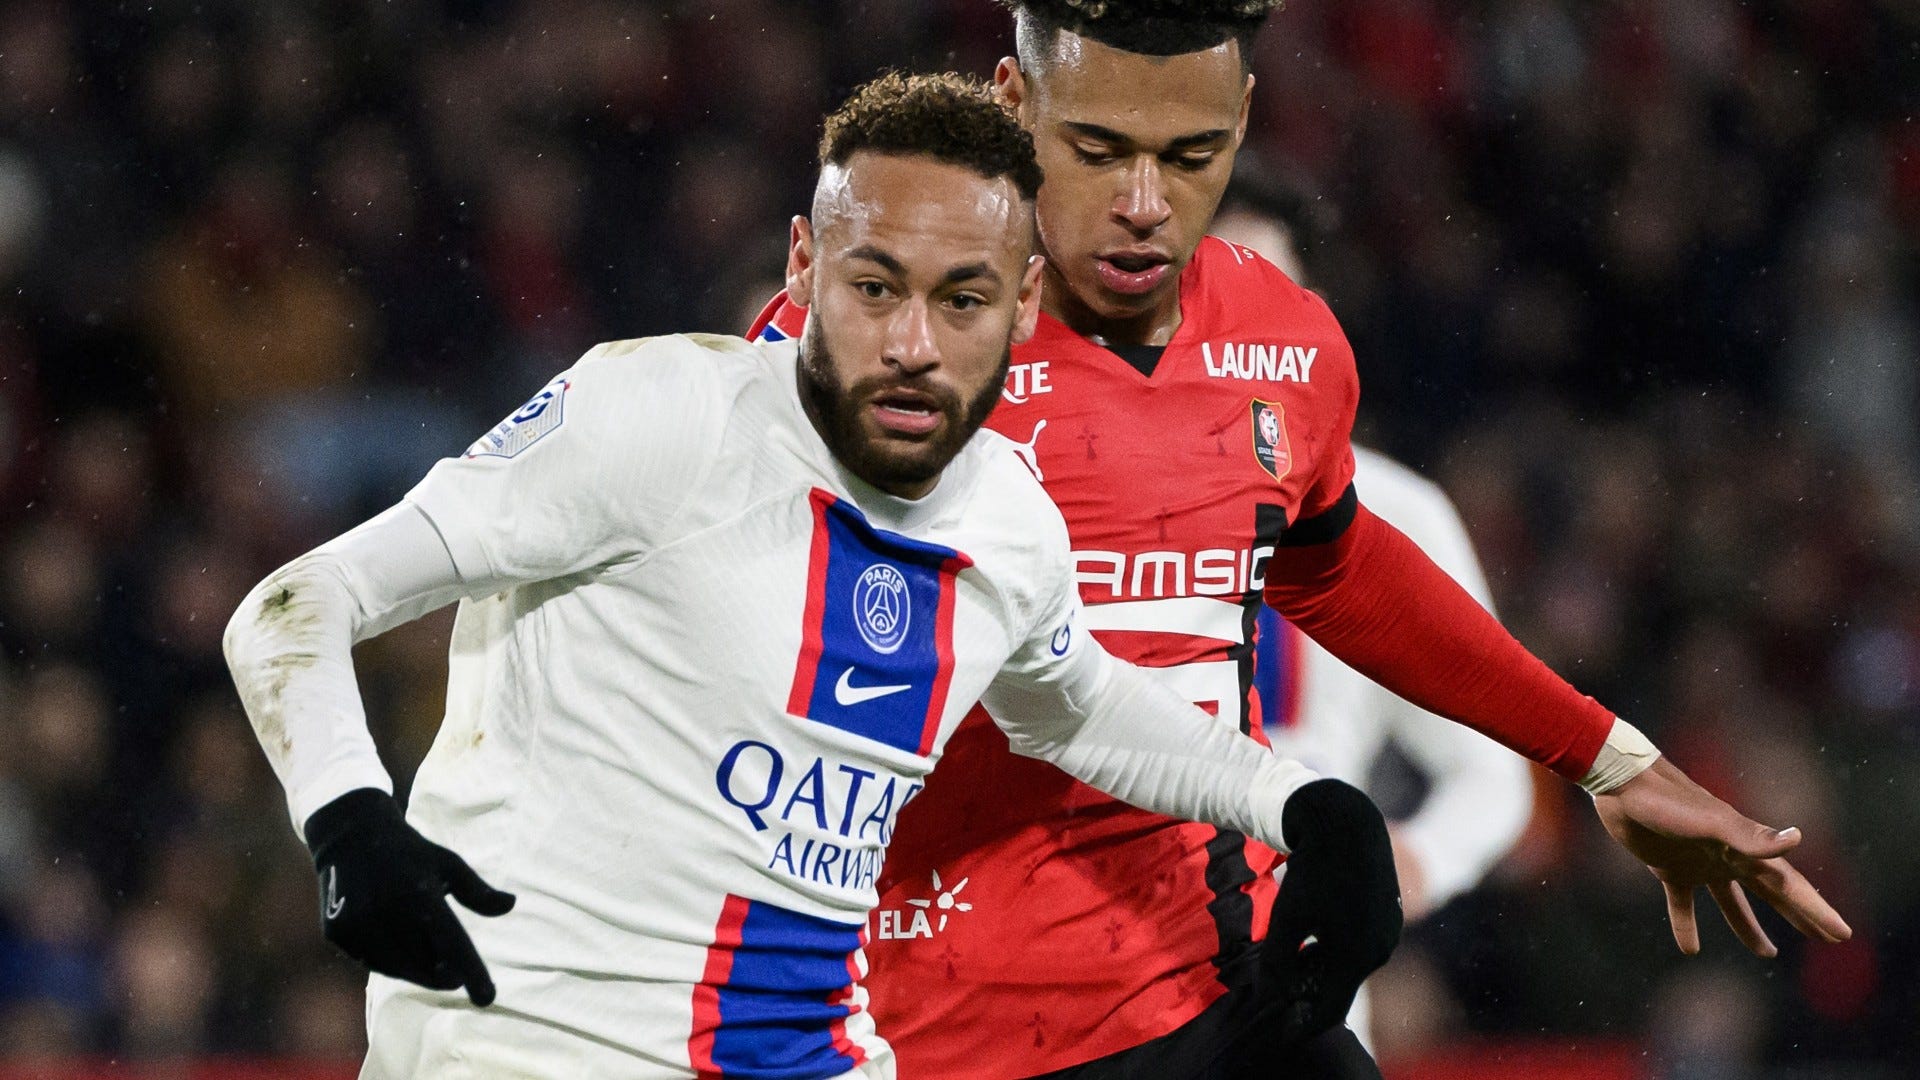 Monaco vs PSG Live stream, TV channel, kick-off time and where to watch Goal US